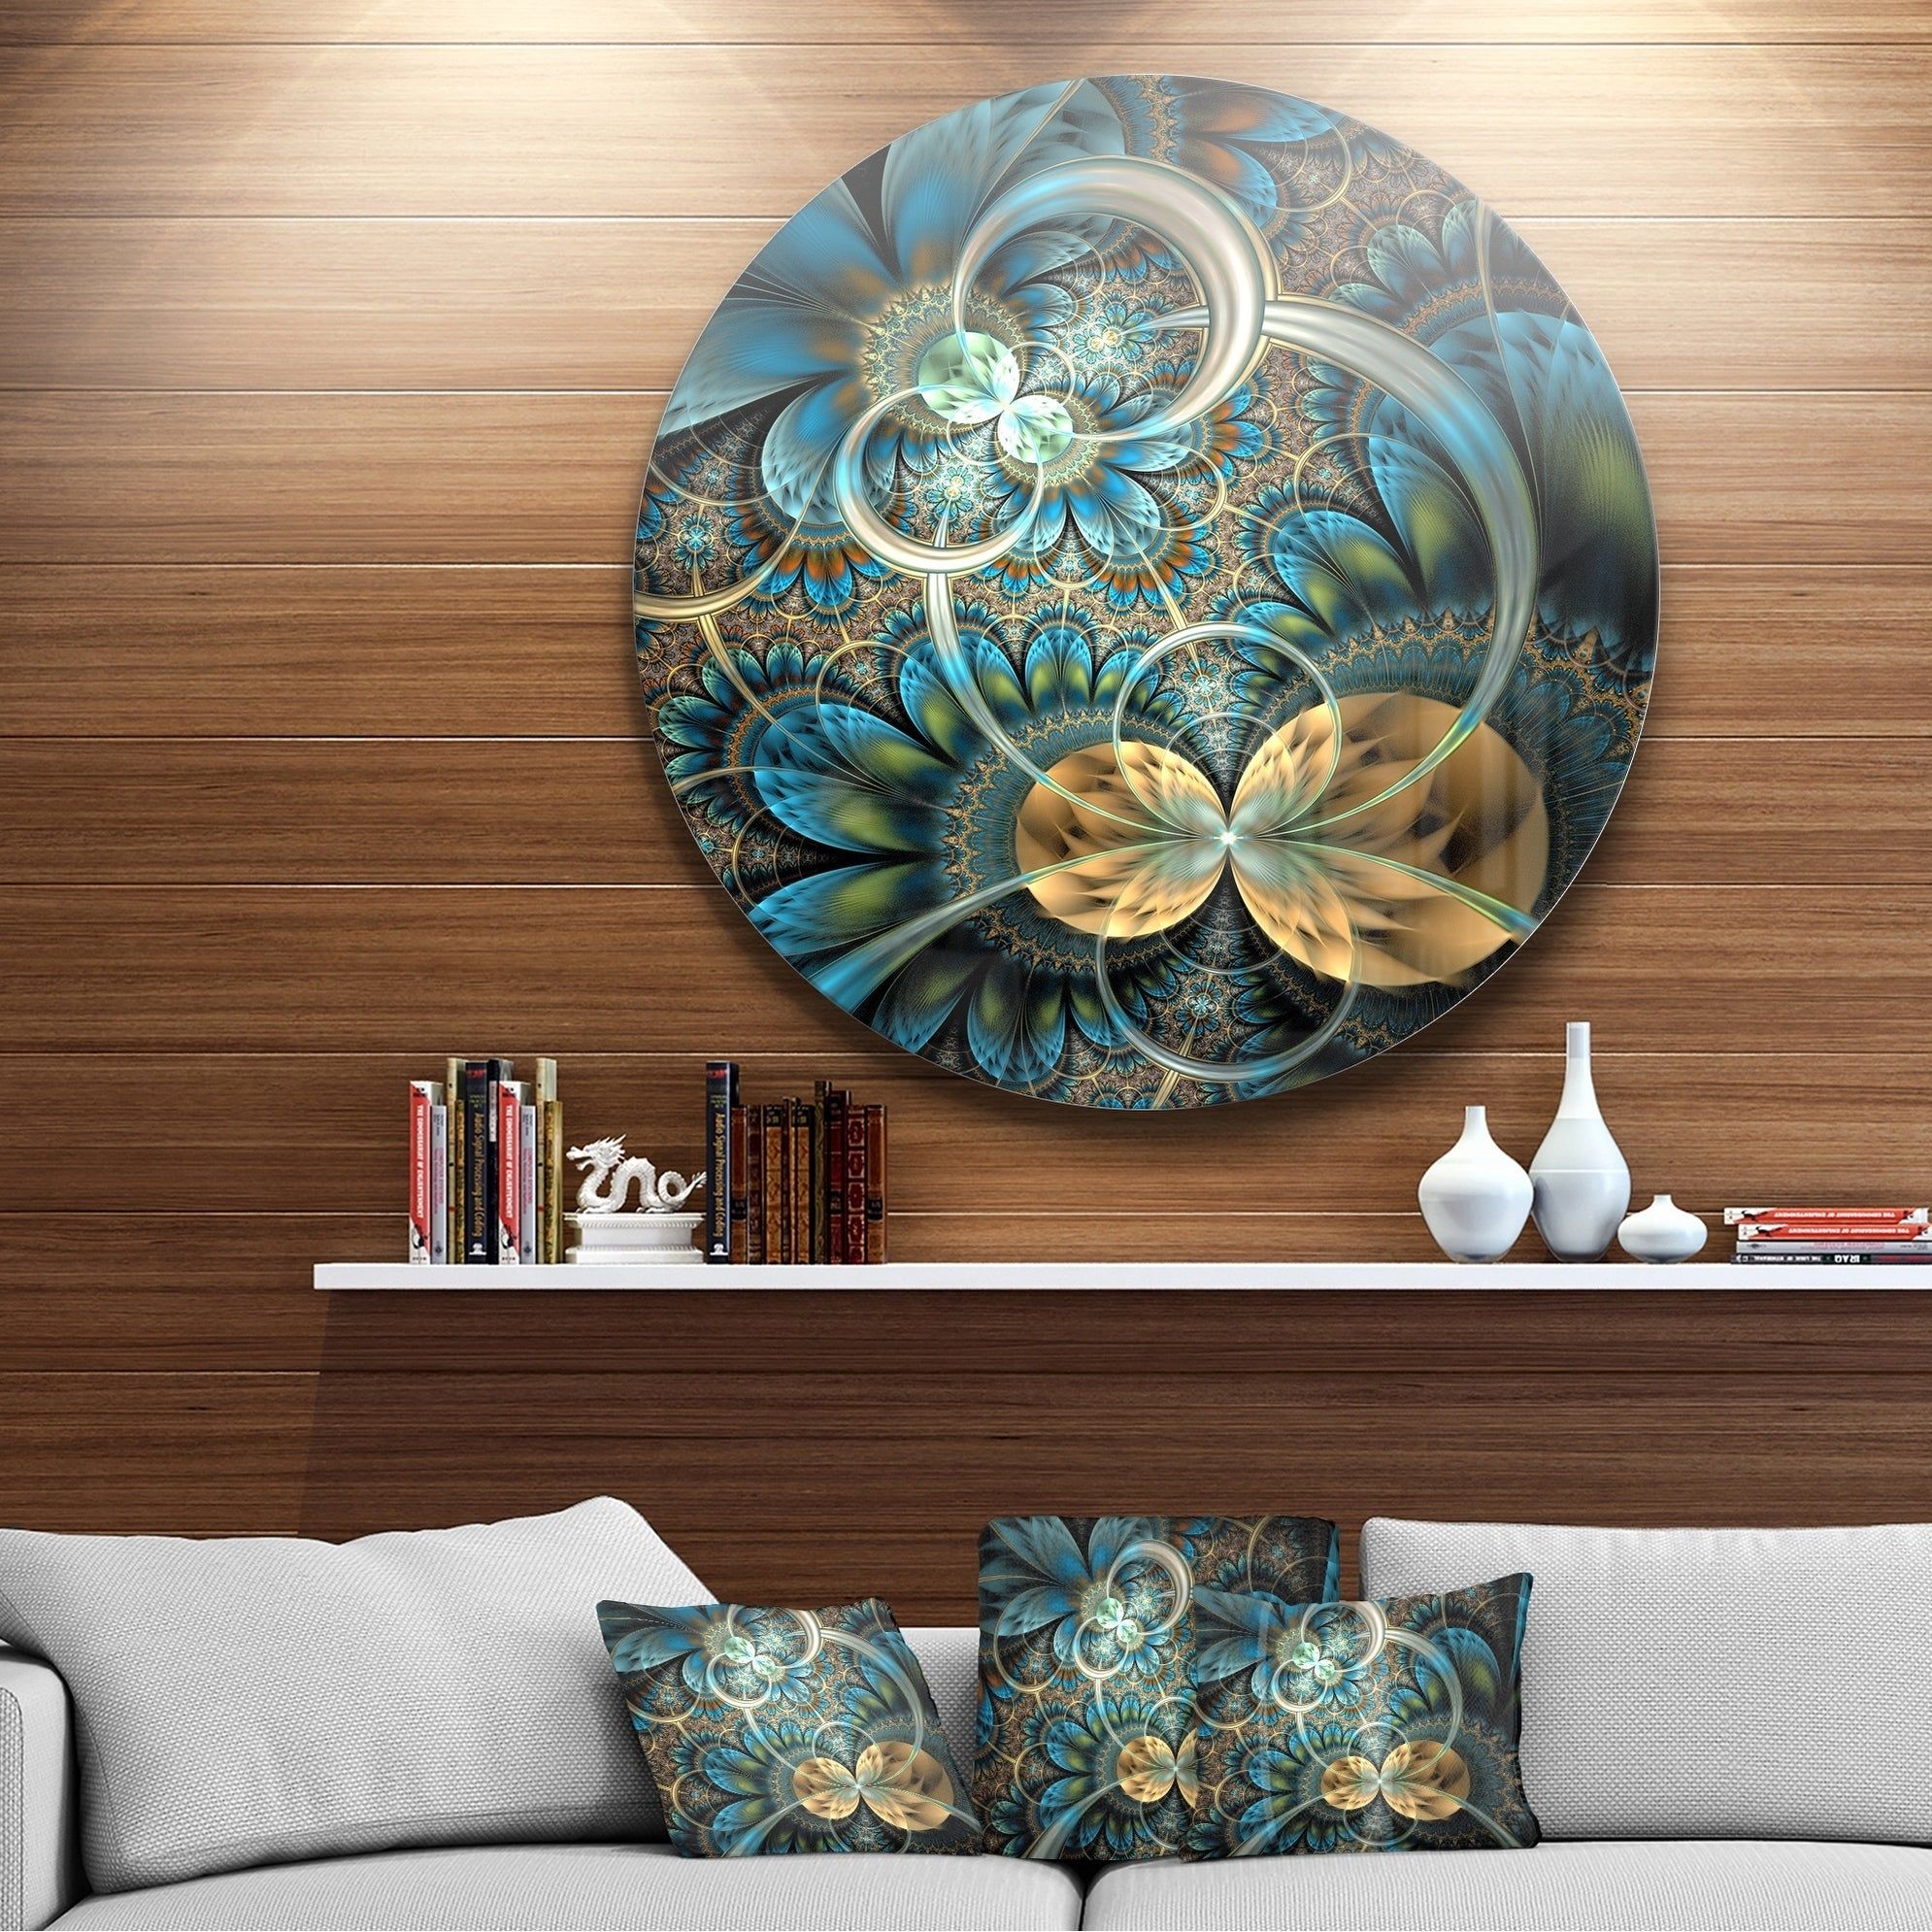 Metal Art | Find Great Art Gallery Deals Shopping At Overstock Throughout 2 Piece Multiple Layer Metal Flower Wall Decor Sets (View 7 of 30)